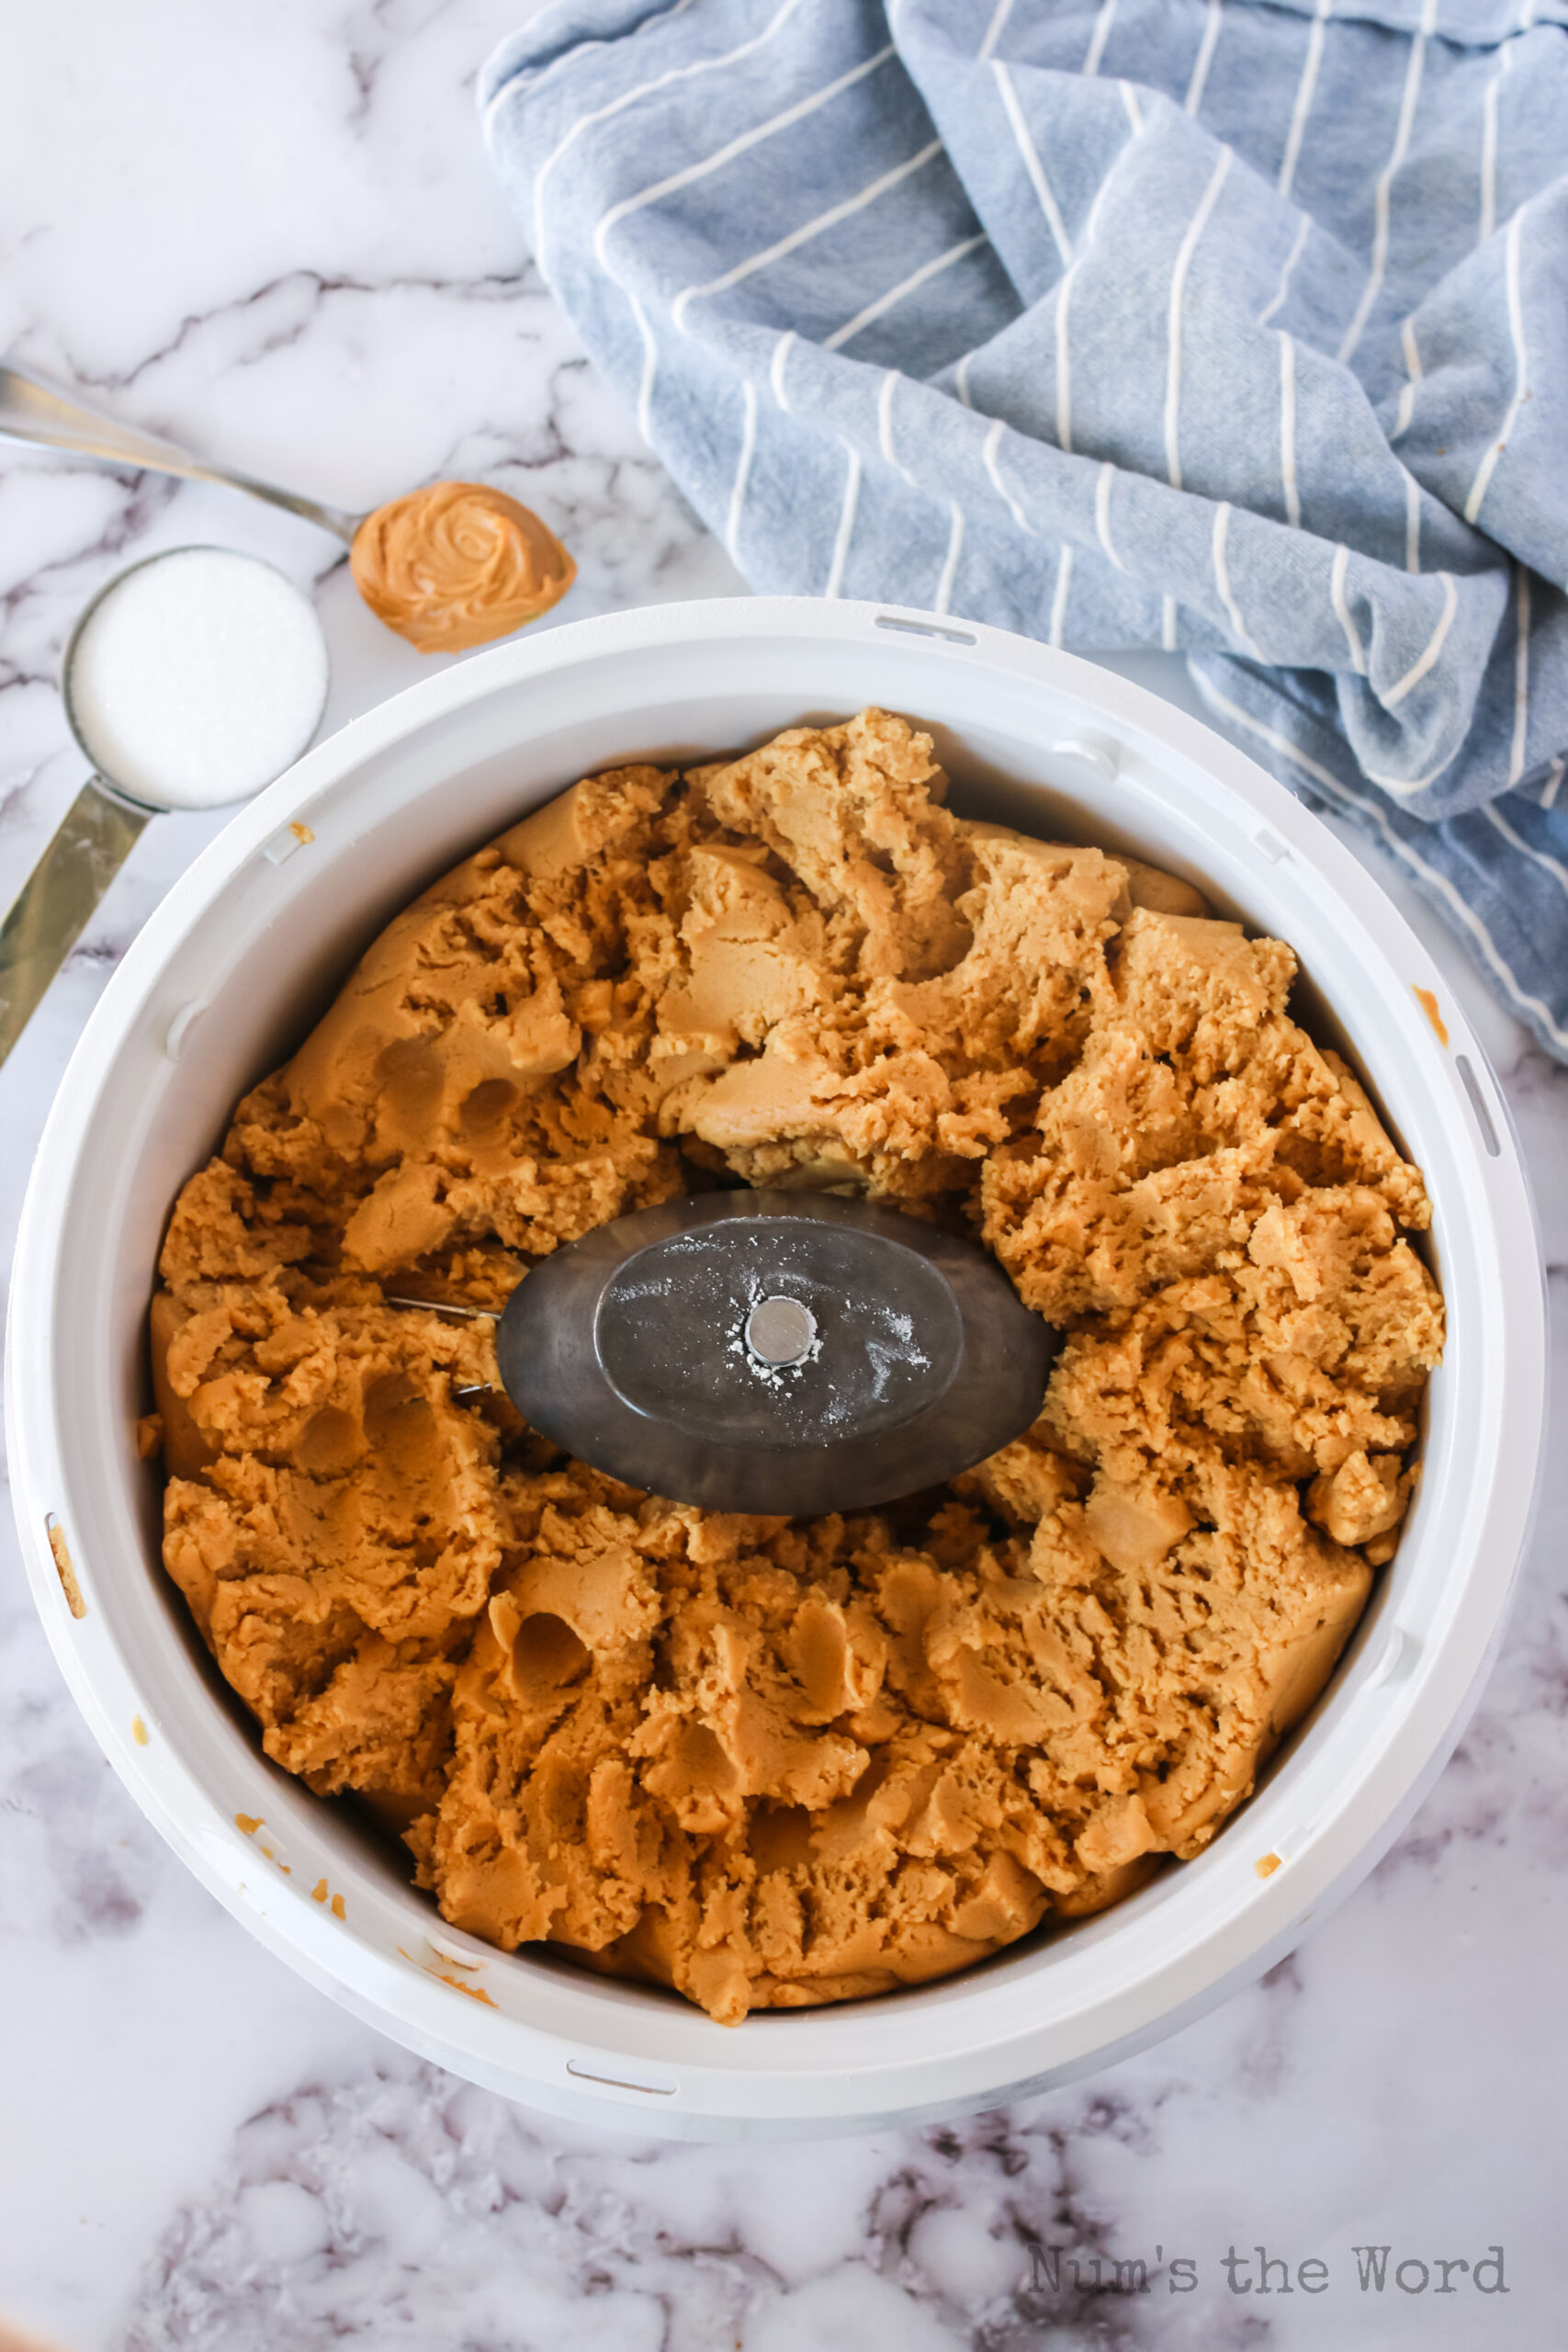 Peanut Butter Cookie Dough in a bowl ready to be rolled